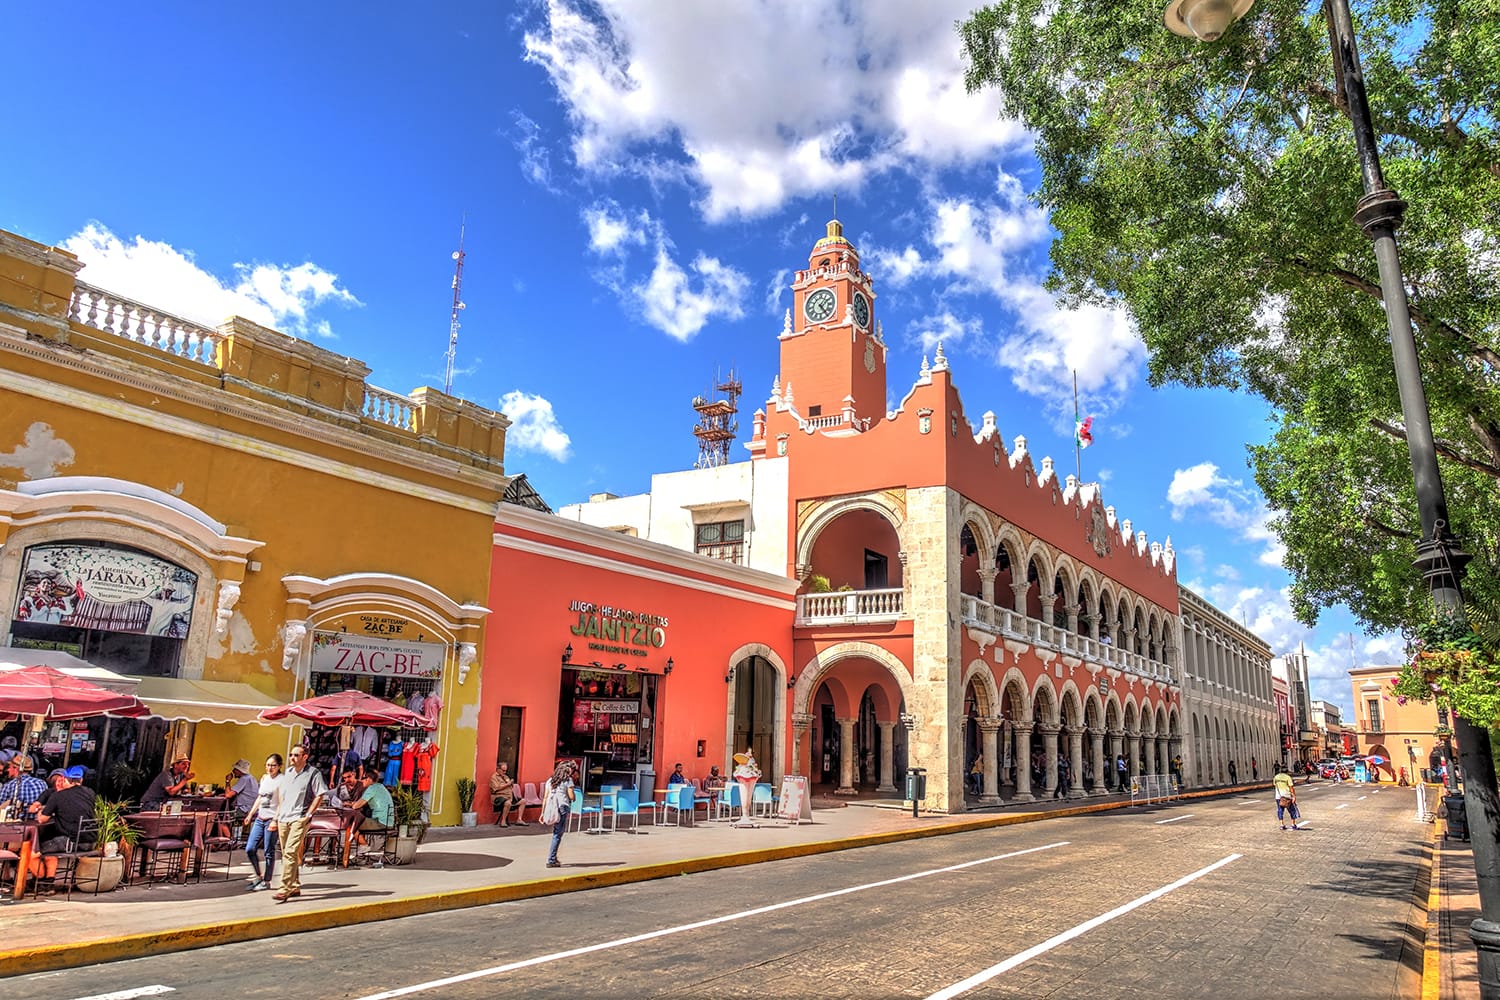 Buildings in the historical center of Merida, Mexico